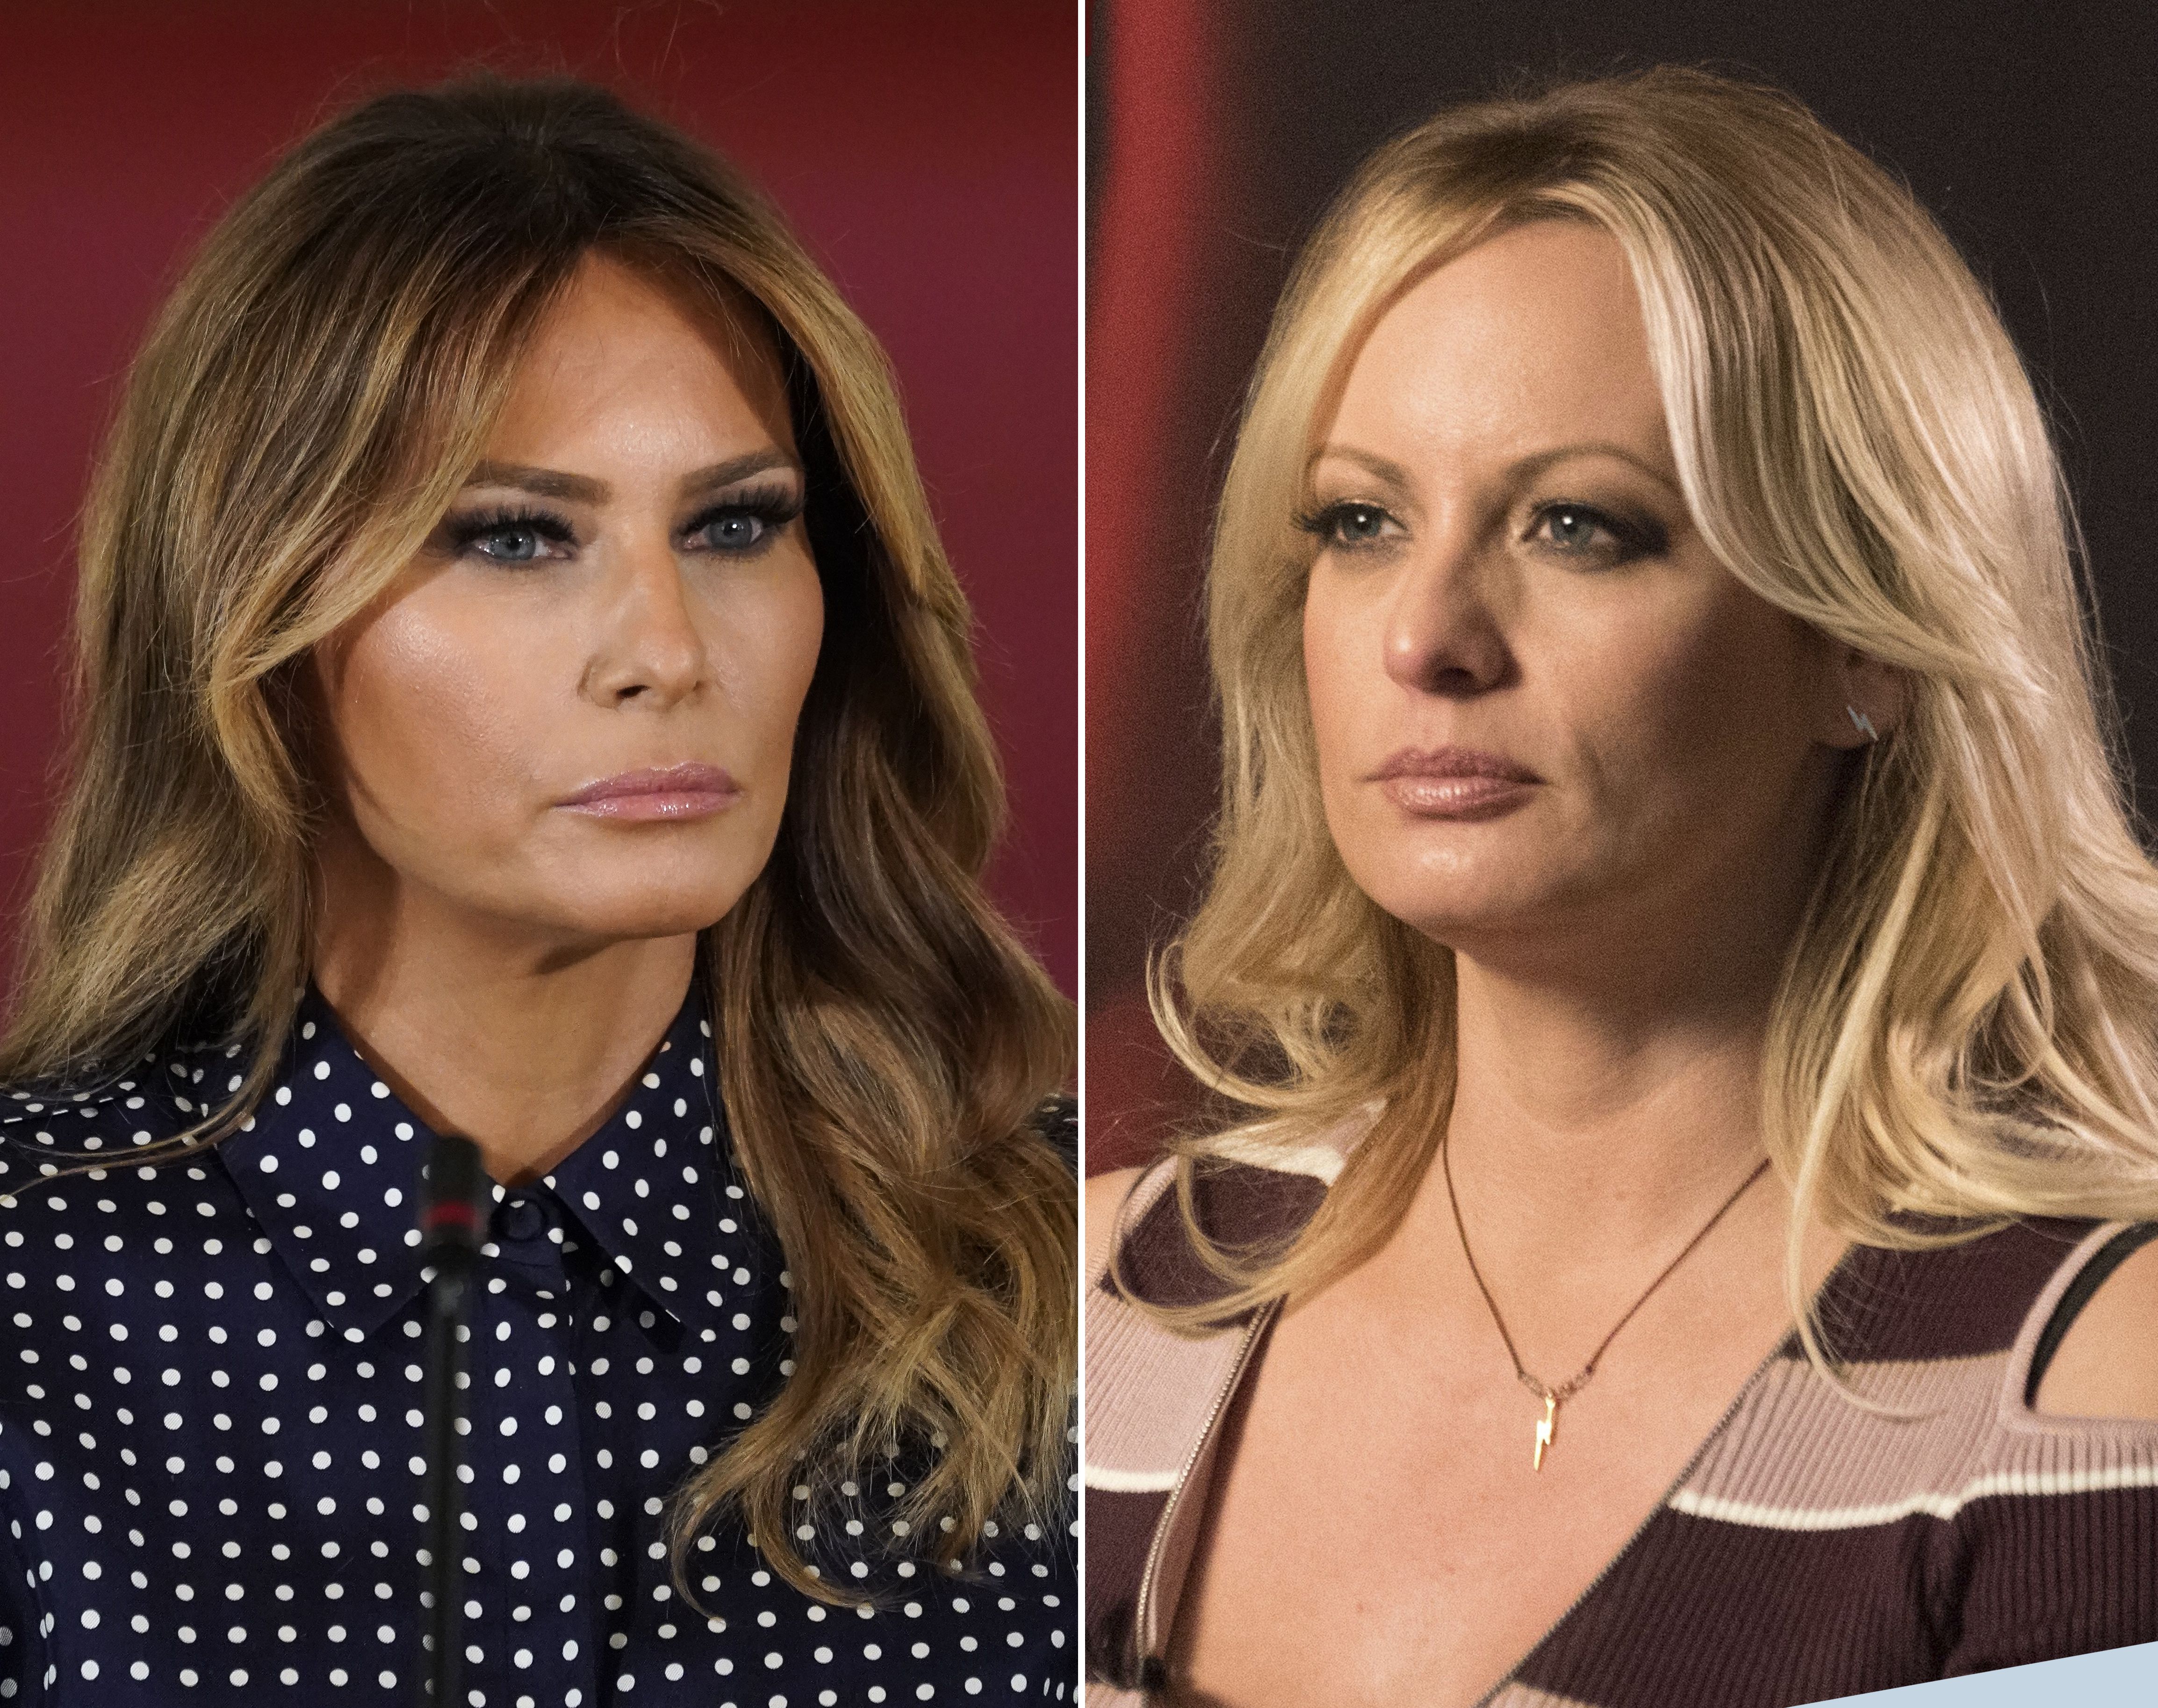 Melania Trump and Stormy Daniels call each other prostitutes